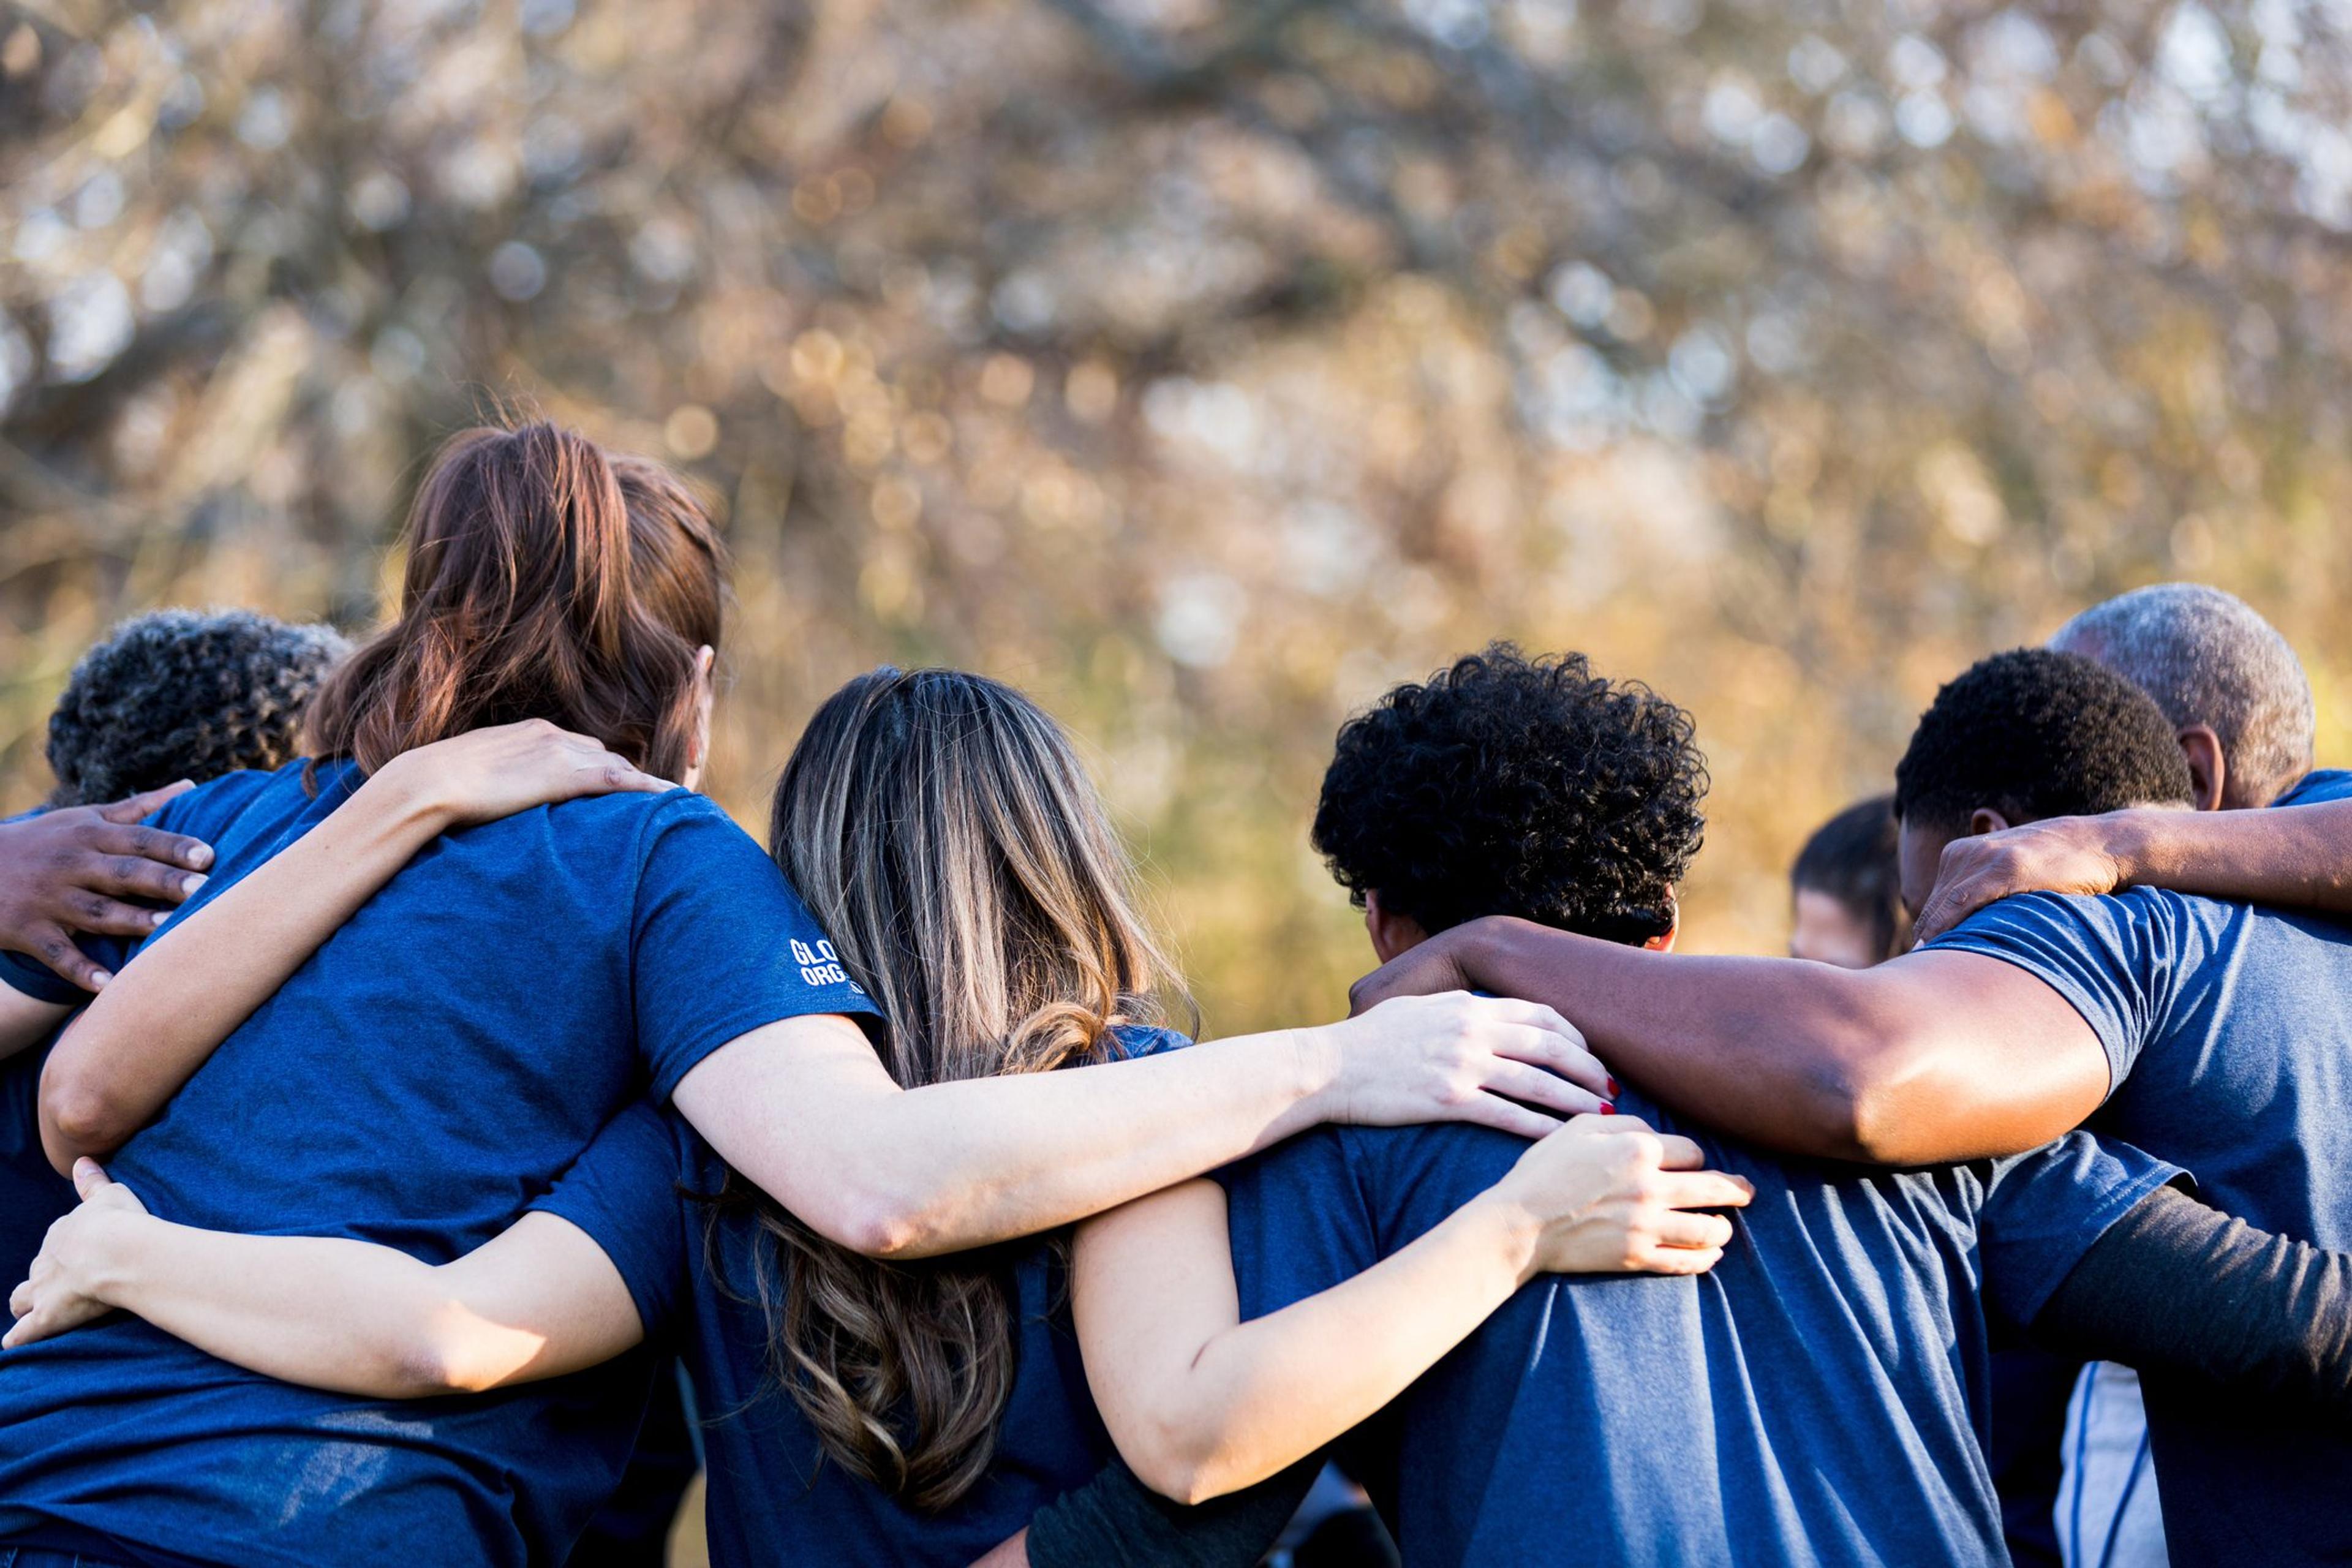 A diverse group of people link arms over peers' backs.